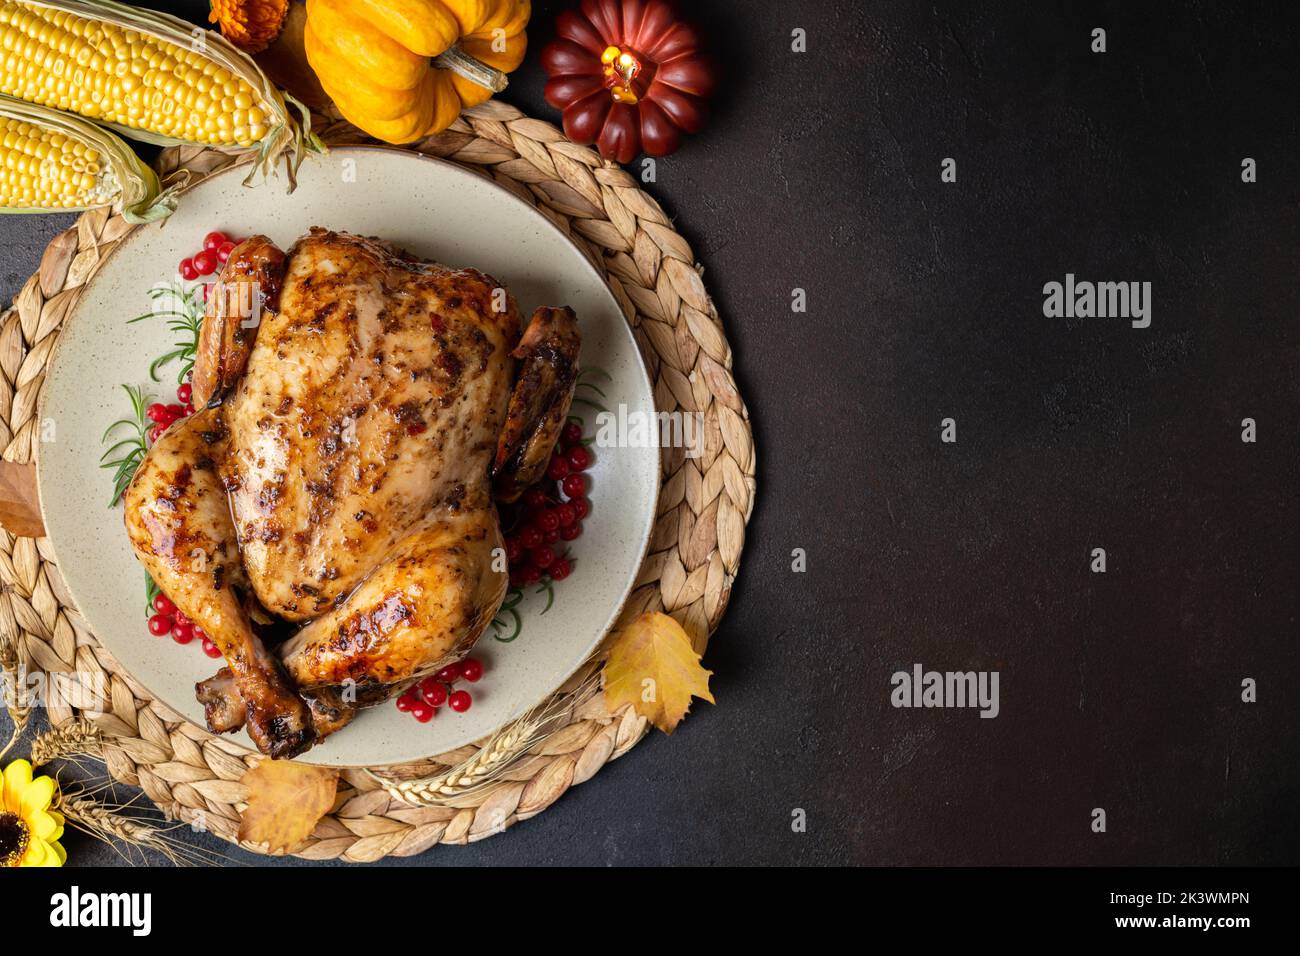 Baked chicken for Thanksgiving Day. Roasted chicken or turkey with herb rosemary and berry and pumpkins for Thanksgiving dinner on dark table. Festive Stock Photo